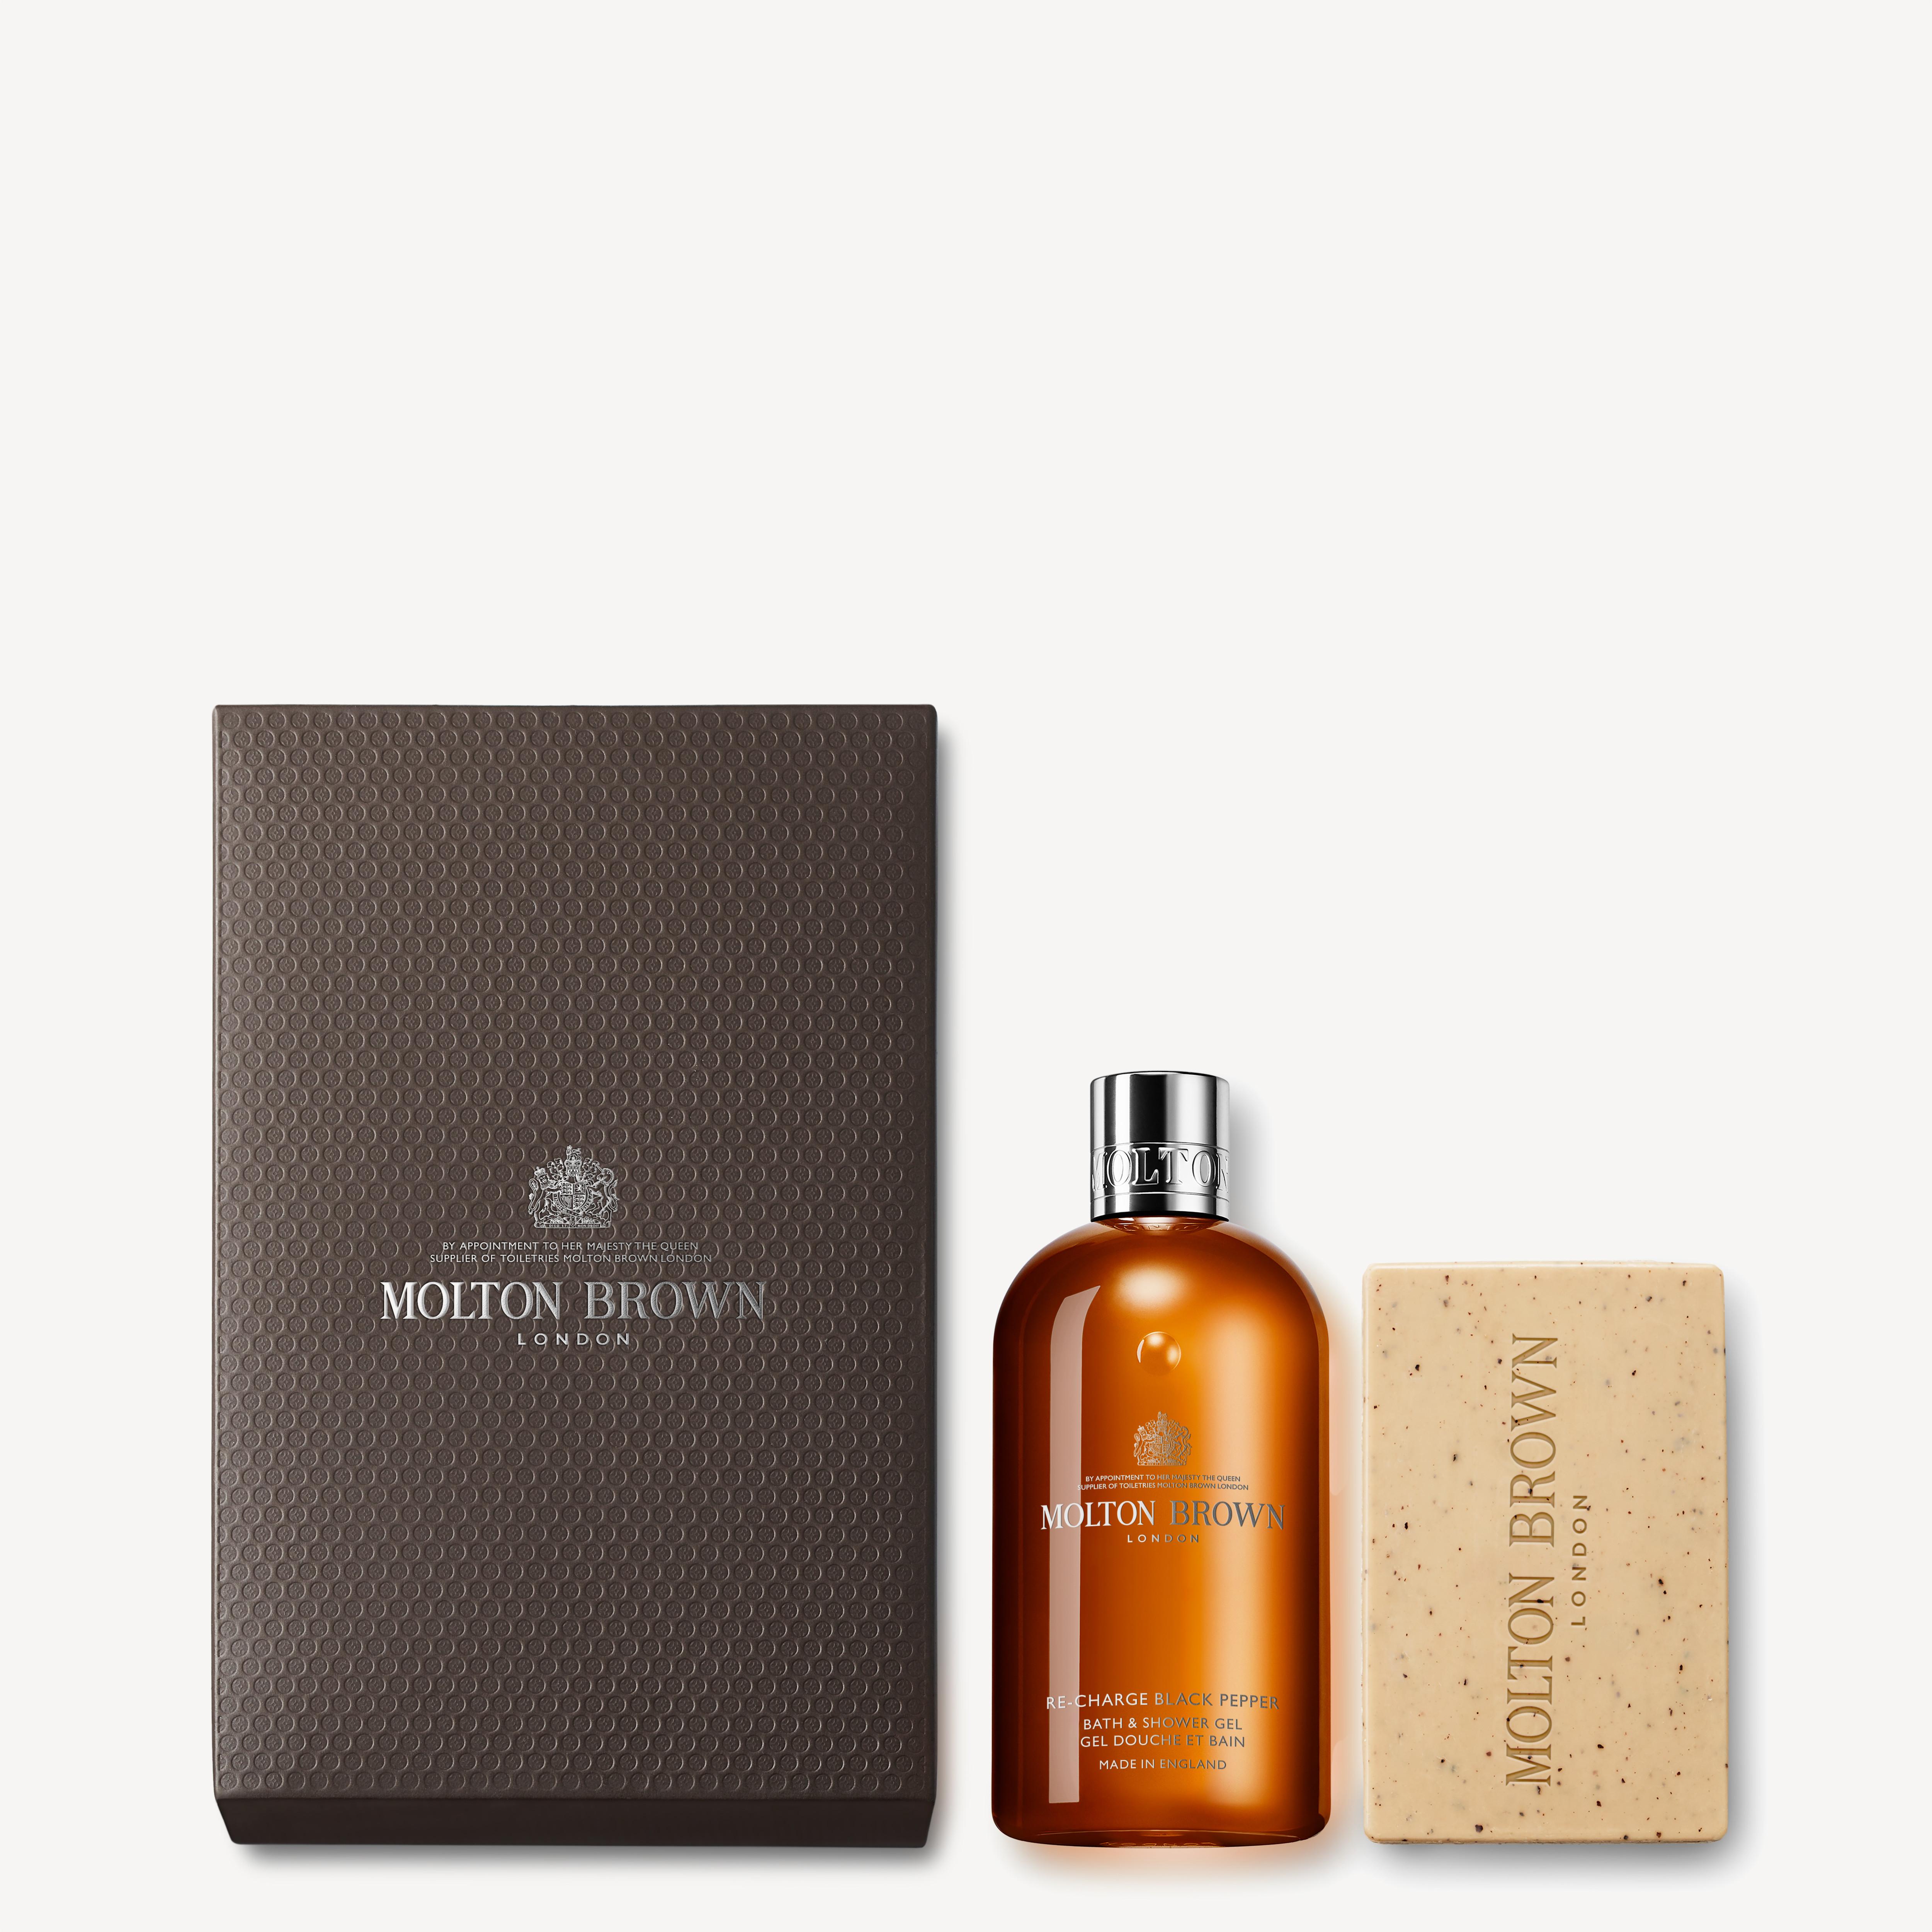 Molton Brown Re-charge Black Pepper Bestsellers Gift Set